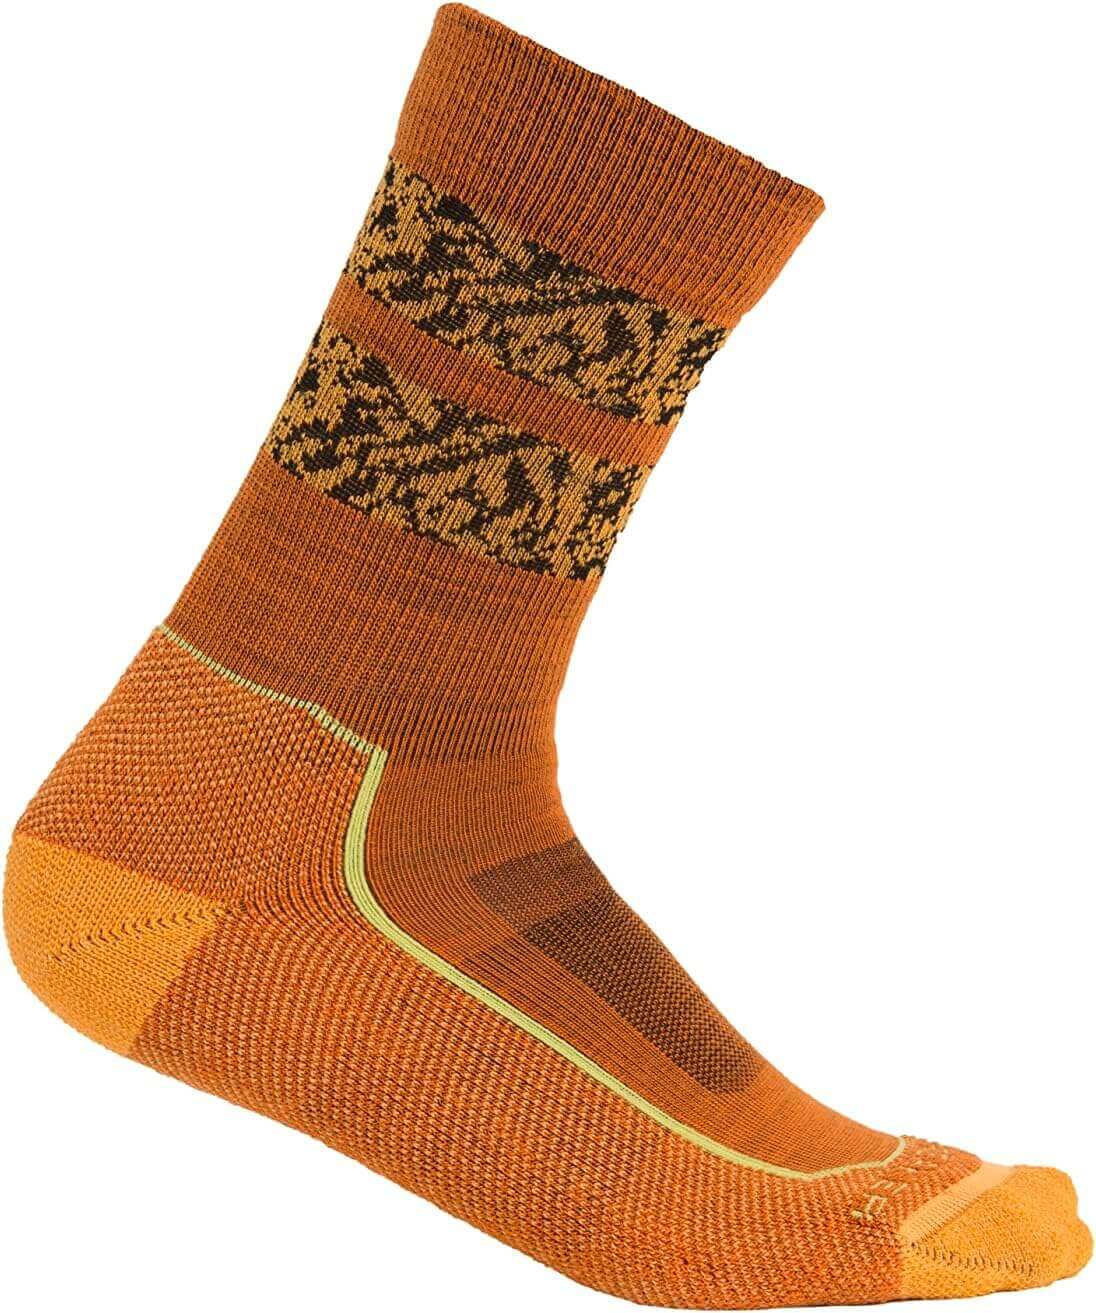 Shop The Latest >Icebreaker Merino Men's Hike+ Light Crew Sock > *Only $24.93*> From The Top Brand > *Icebreakerl* > Shop Now and Get Free Shipping On Orders Over $45.00 >*Shop Earth Foot*